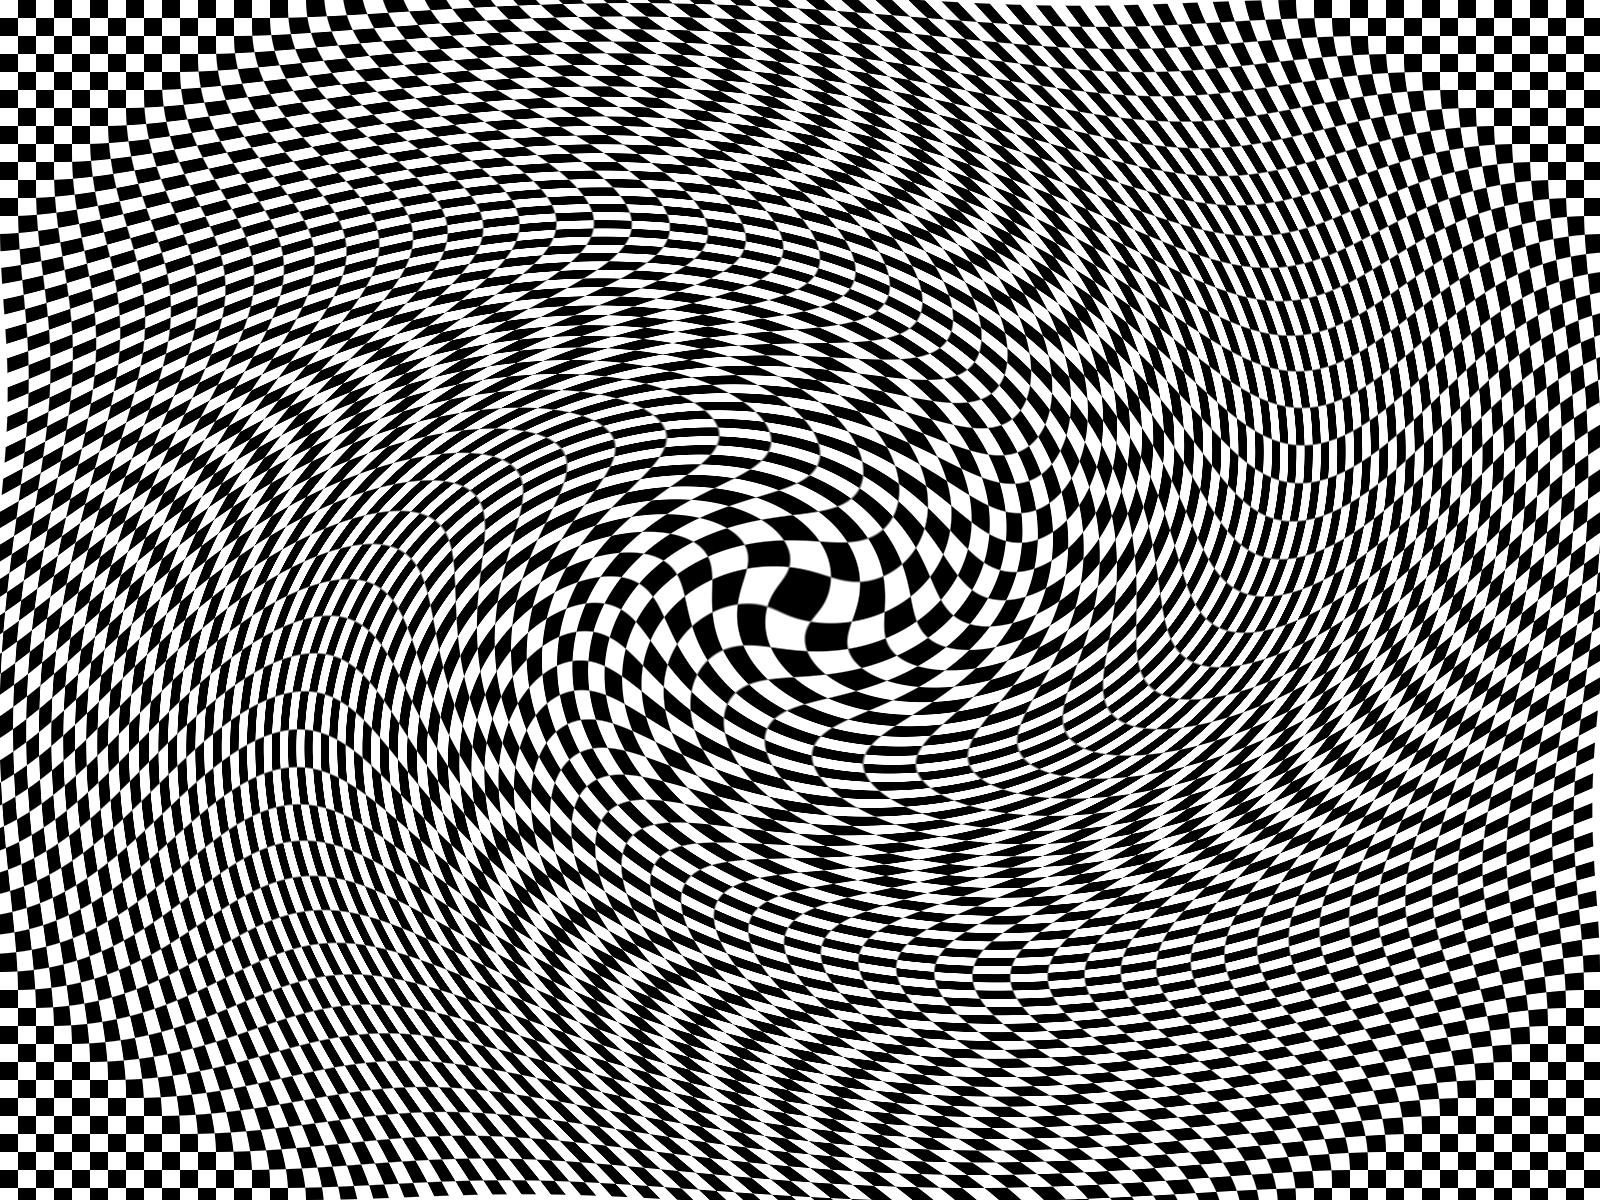 free-download-illusions-optical-wallpaper-1600x1200-illusions-optical